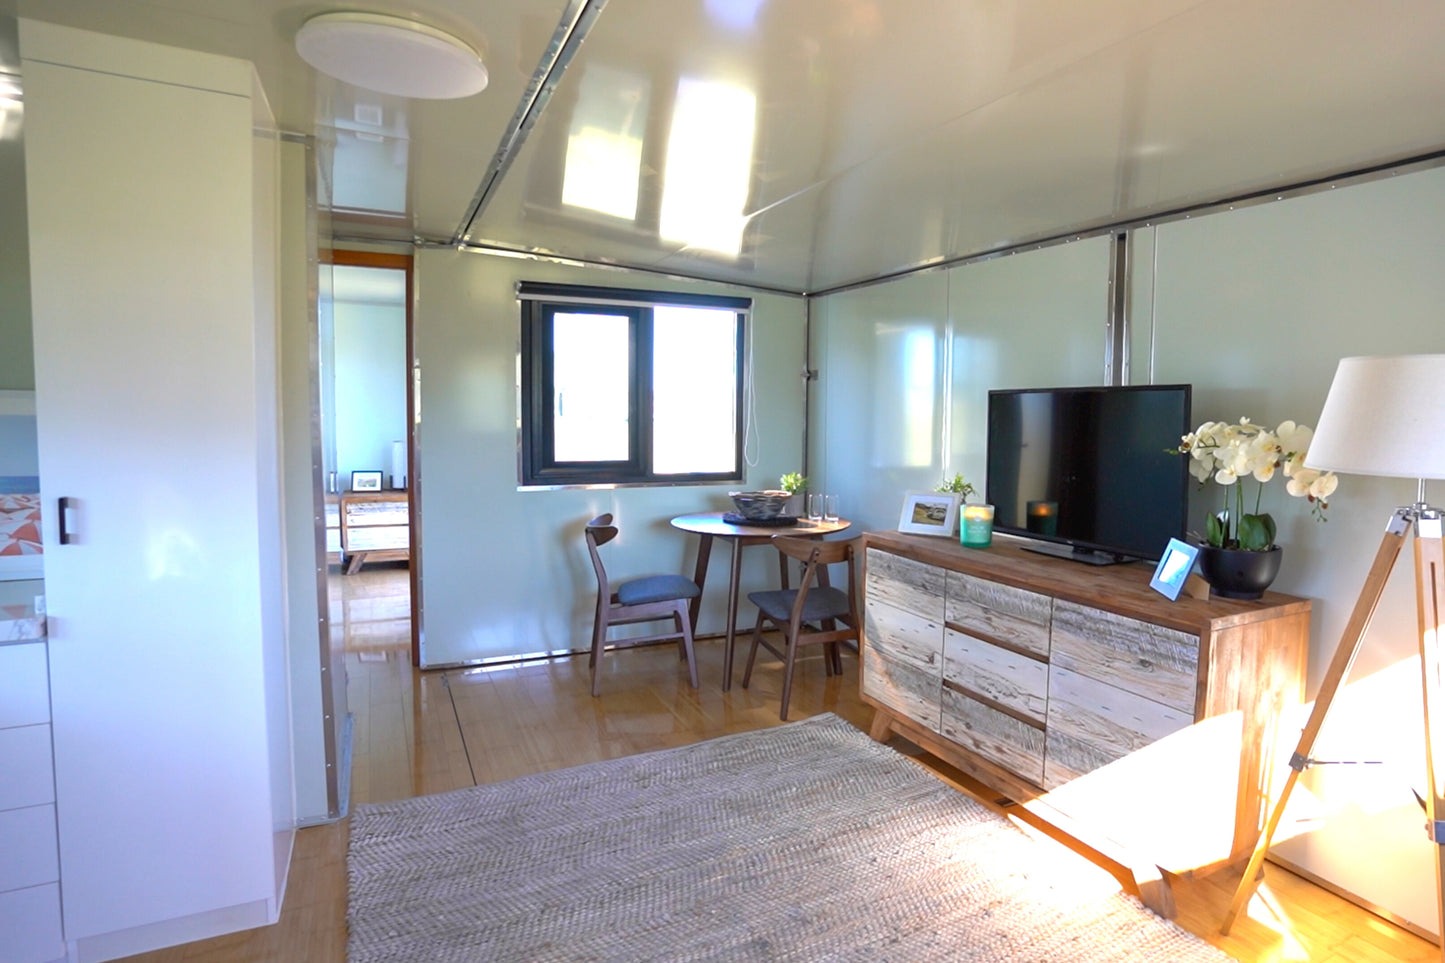 10.9m Expanding Mobile Cabin / Tiny Home